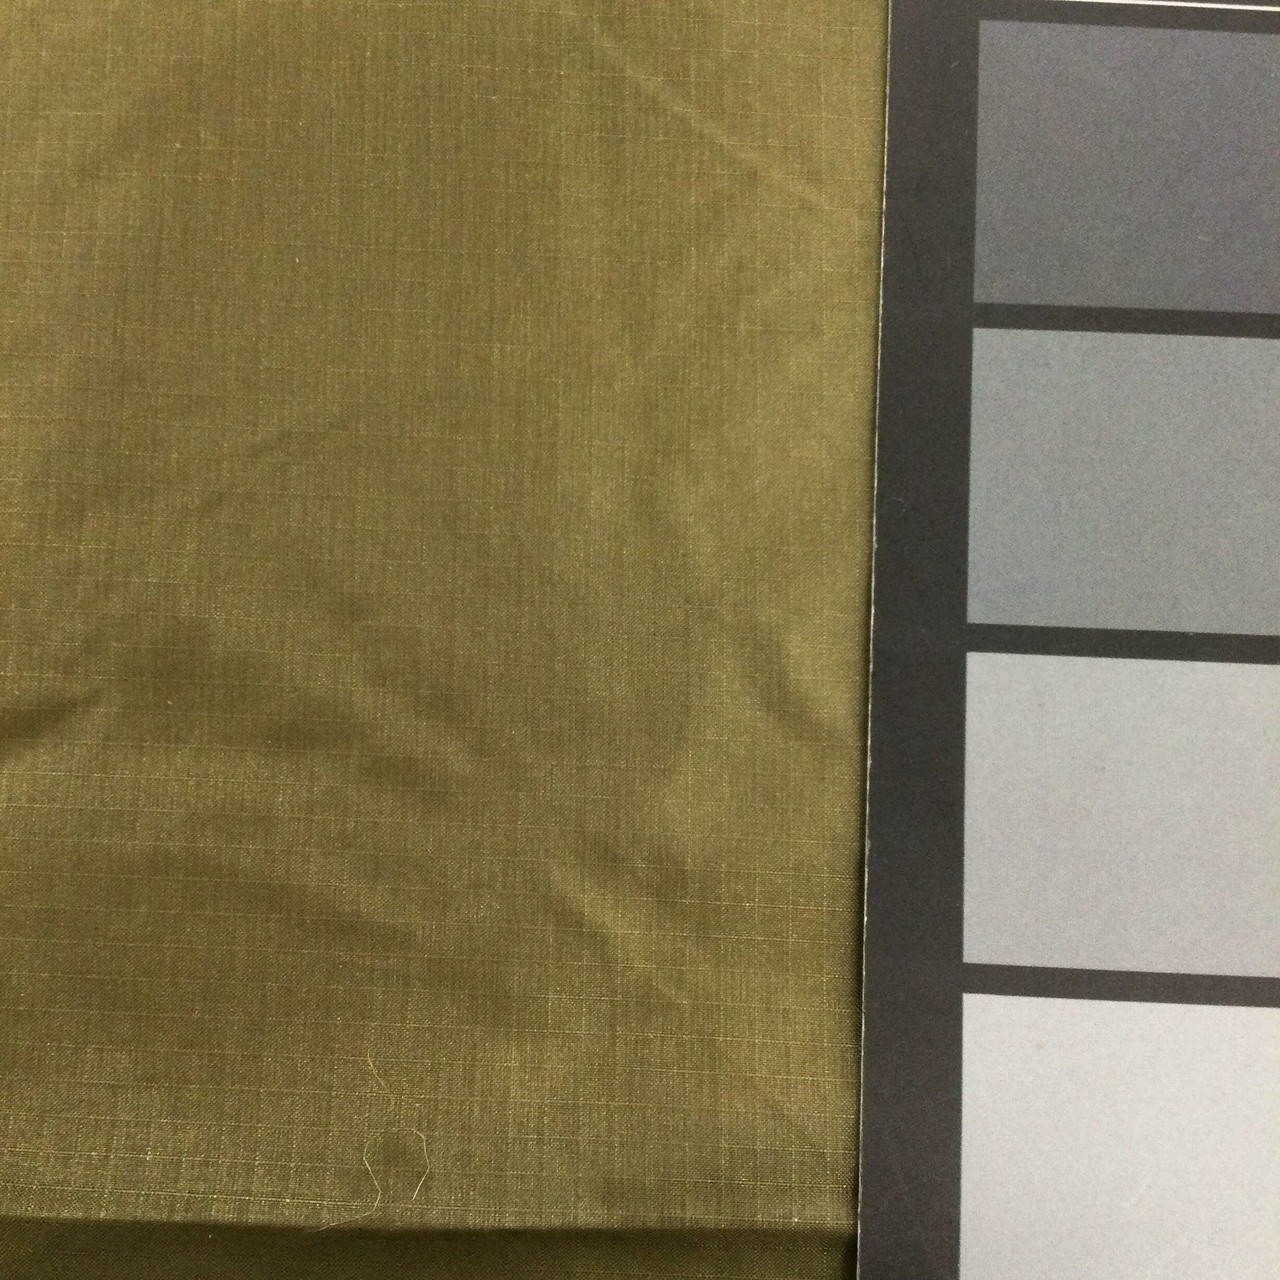 Outdoor Fabric Olive 210 Denier Ripstop Nylon Fabric 60 Wide Waterproof  for